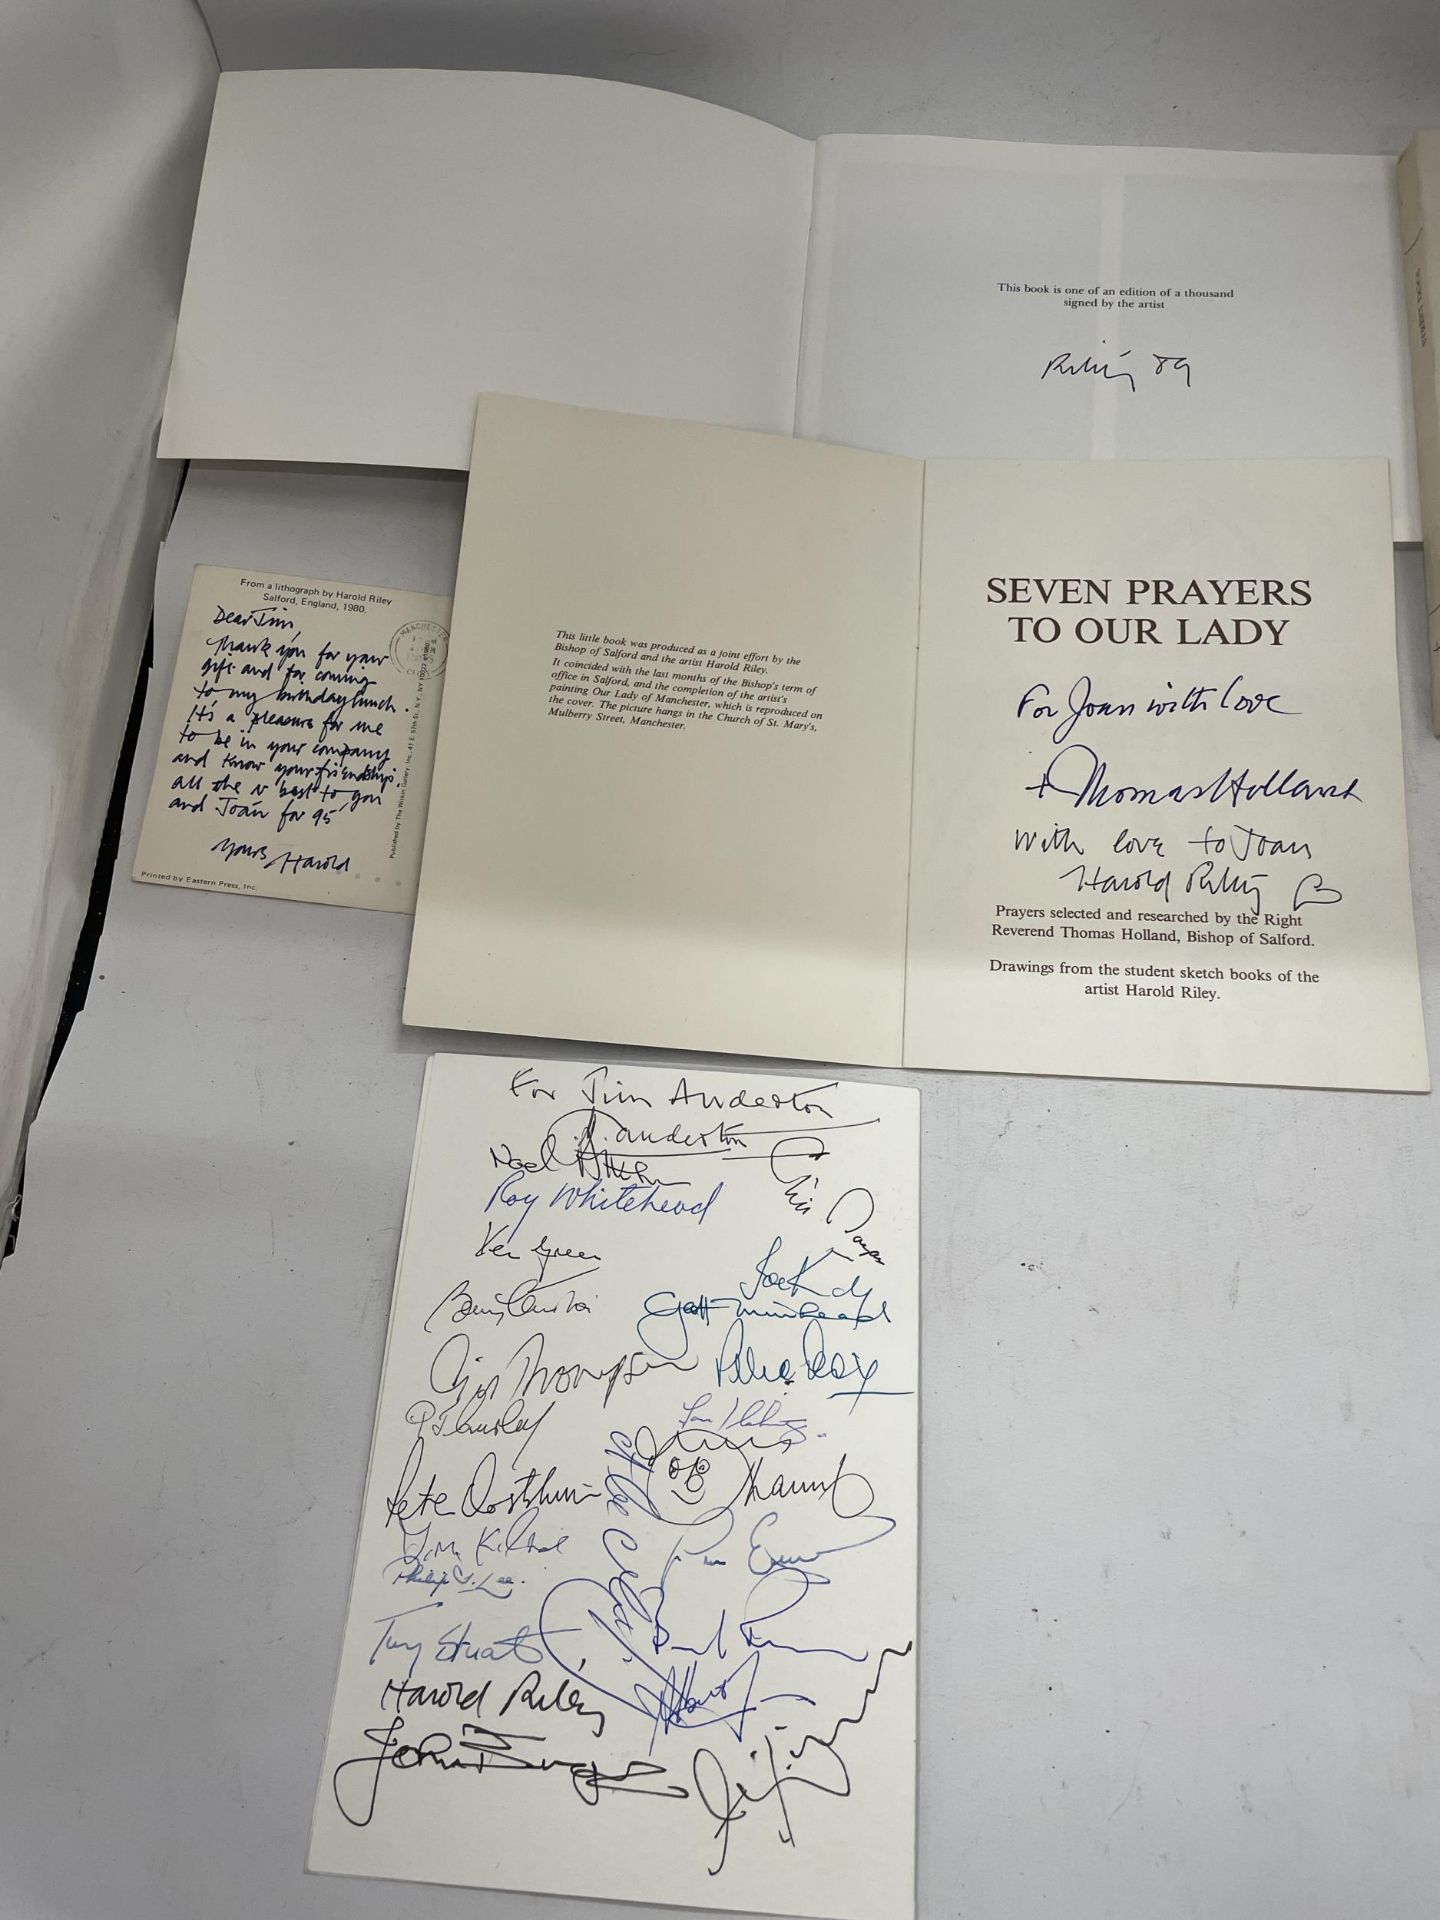 A COLLECTION OF SIGNED ARTISTS EPHEMERA AND BOOKLETS, HAROLD RILEY, L.S LOWRY BOOK, STREET DOGS BOOK - Image 2 of 4